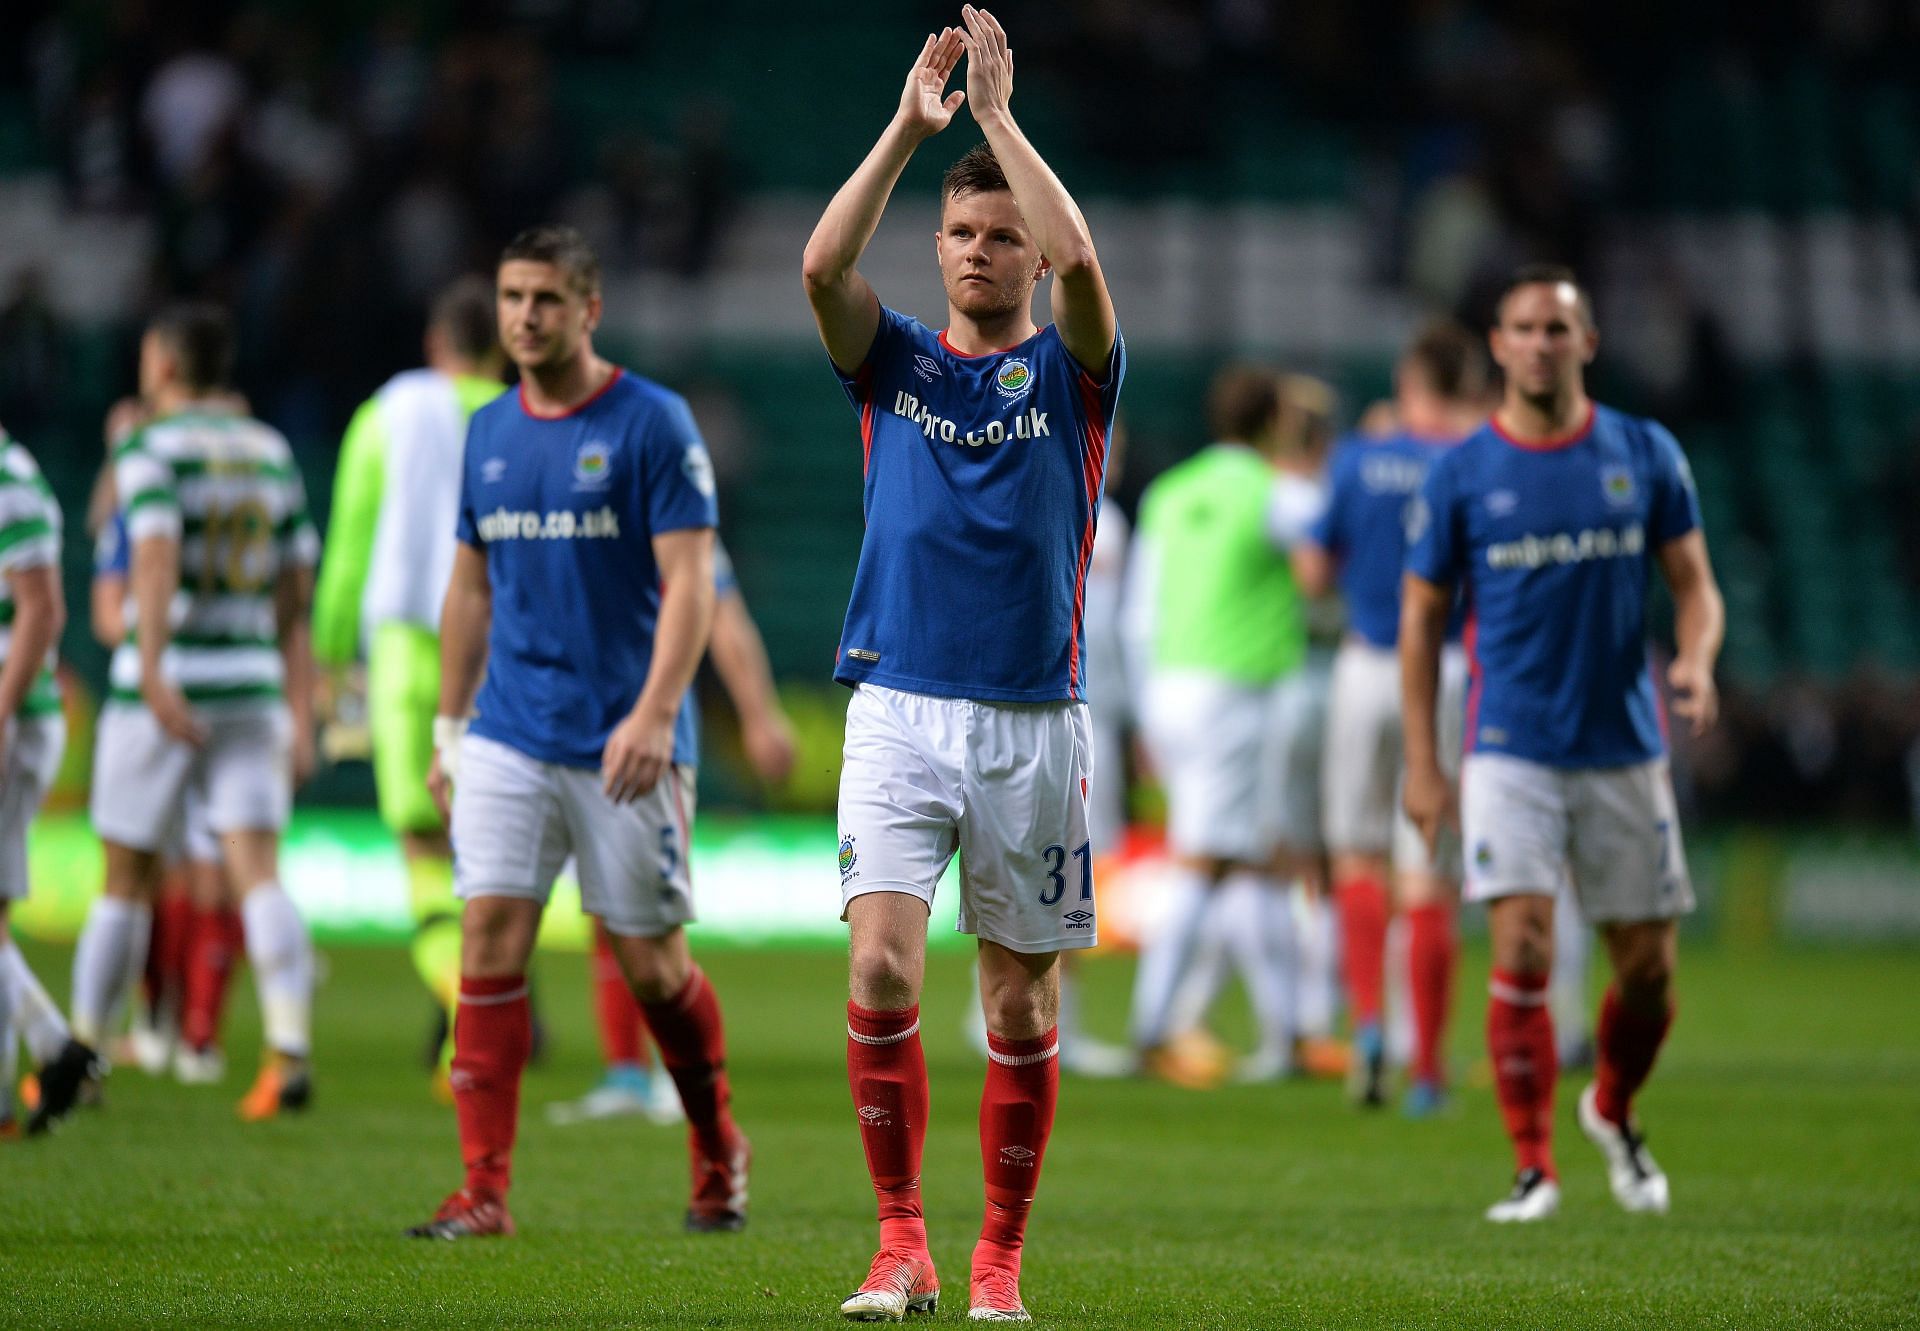 Linfield will take on Zurich in UEFA Europa League qualifying on Thursday.